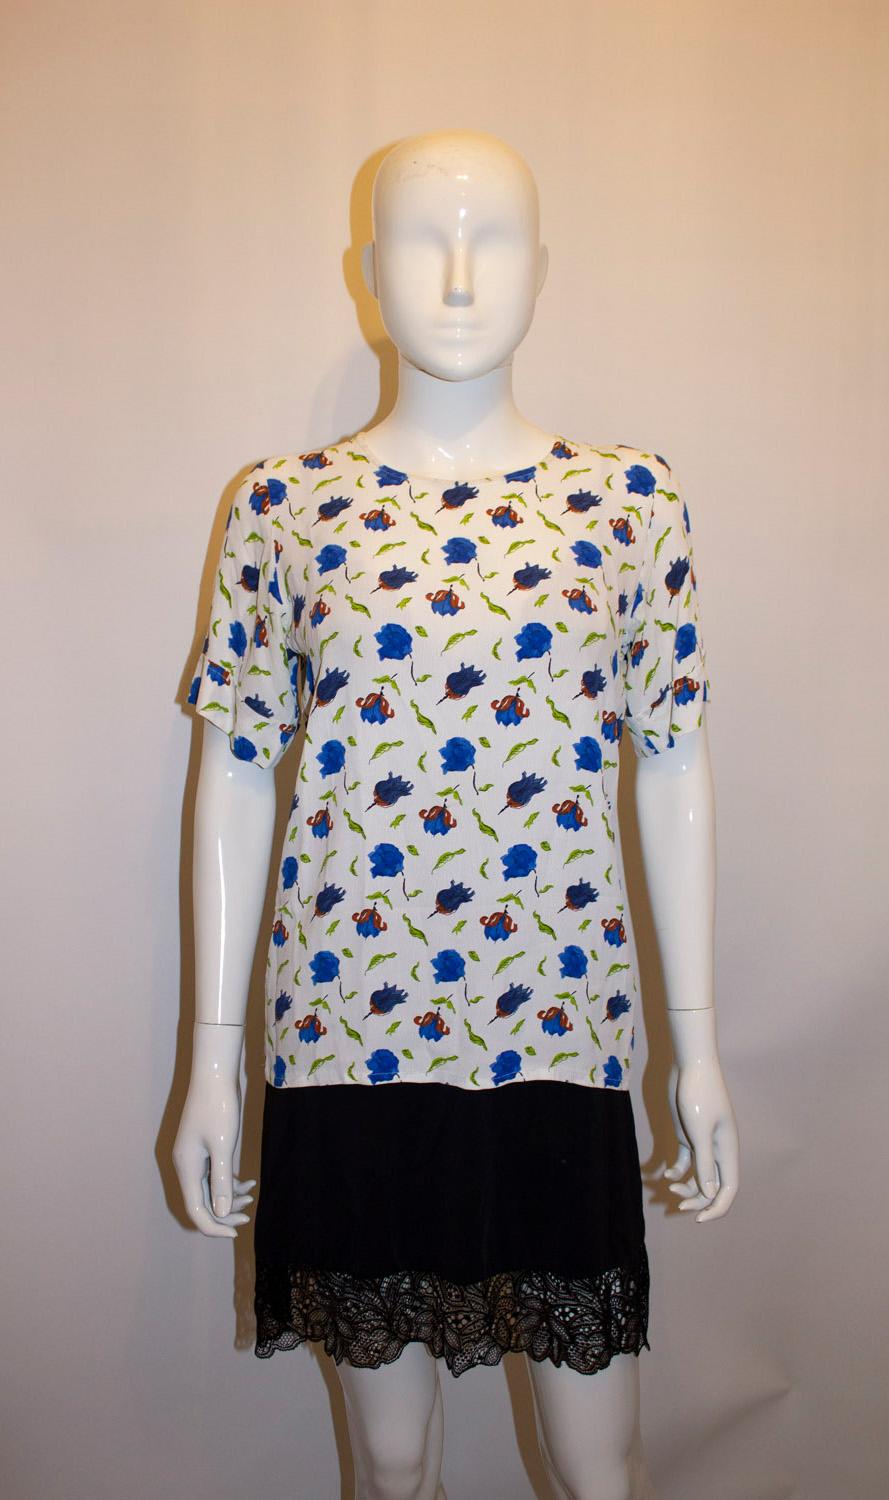 A pretty and easy to wear vintage top by Yves Saint Laurent , Rive Gauche . The top has a white background with a blue, grey and brown floral print. Size 36 Measurements: Bust up to 37'', length 25''